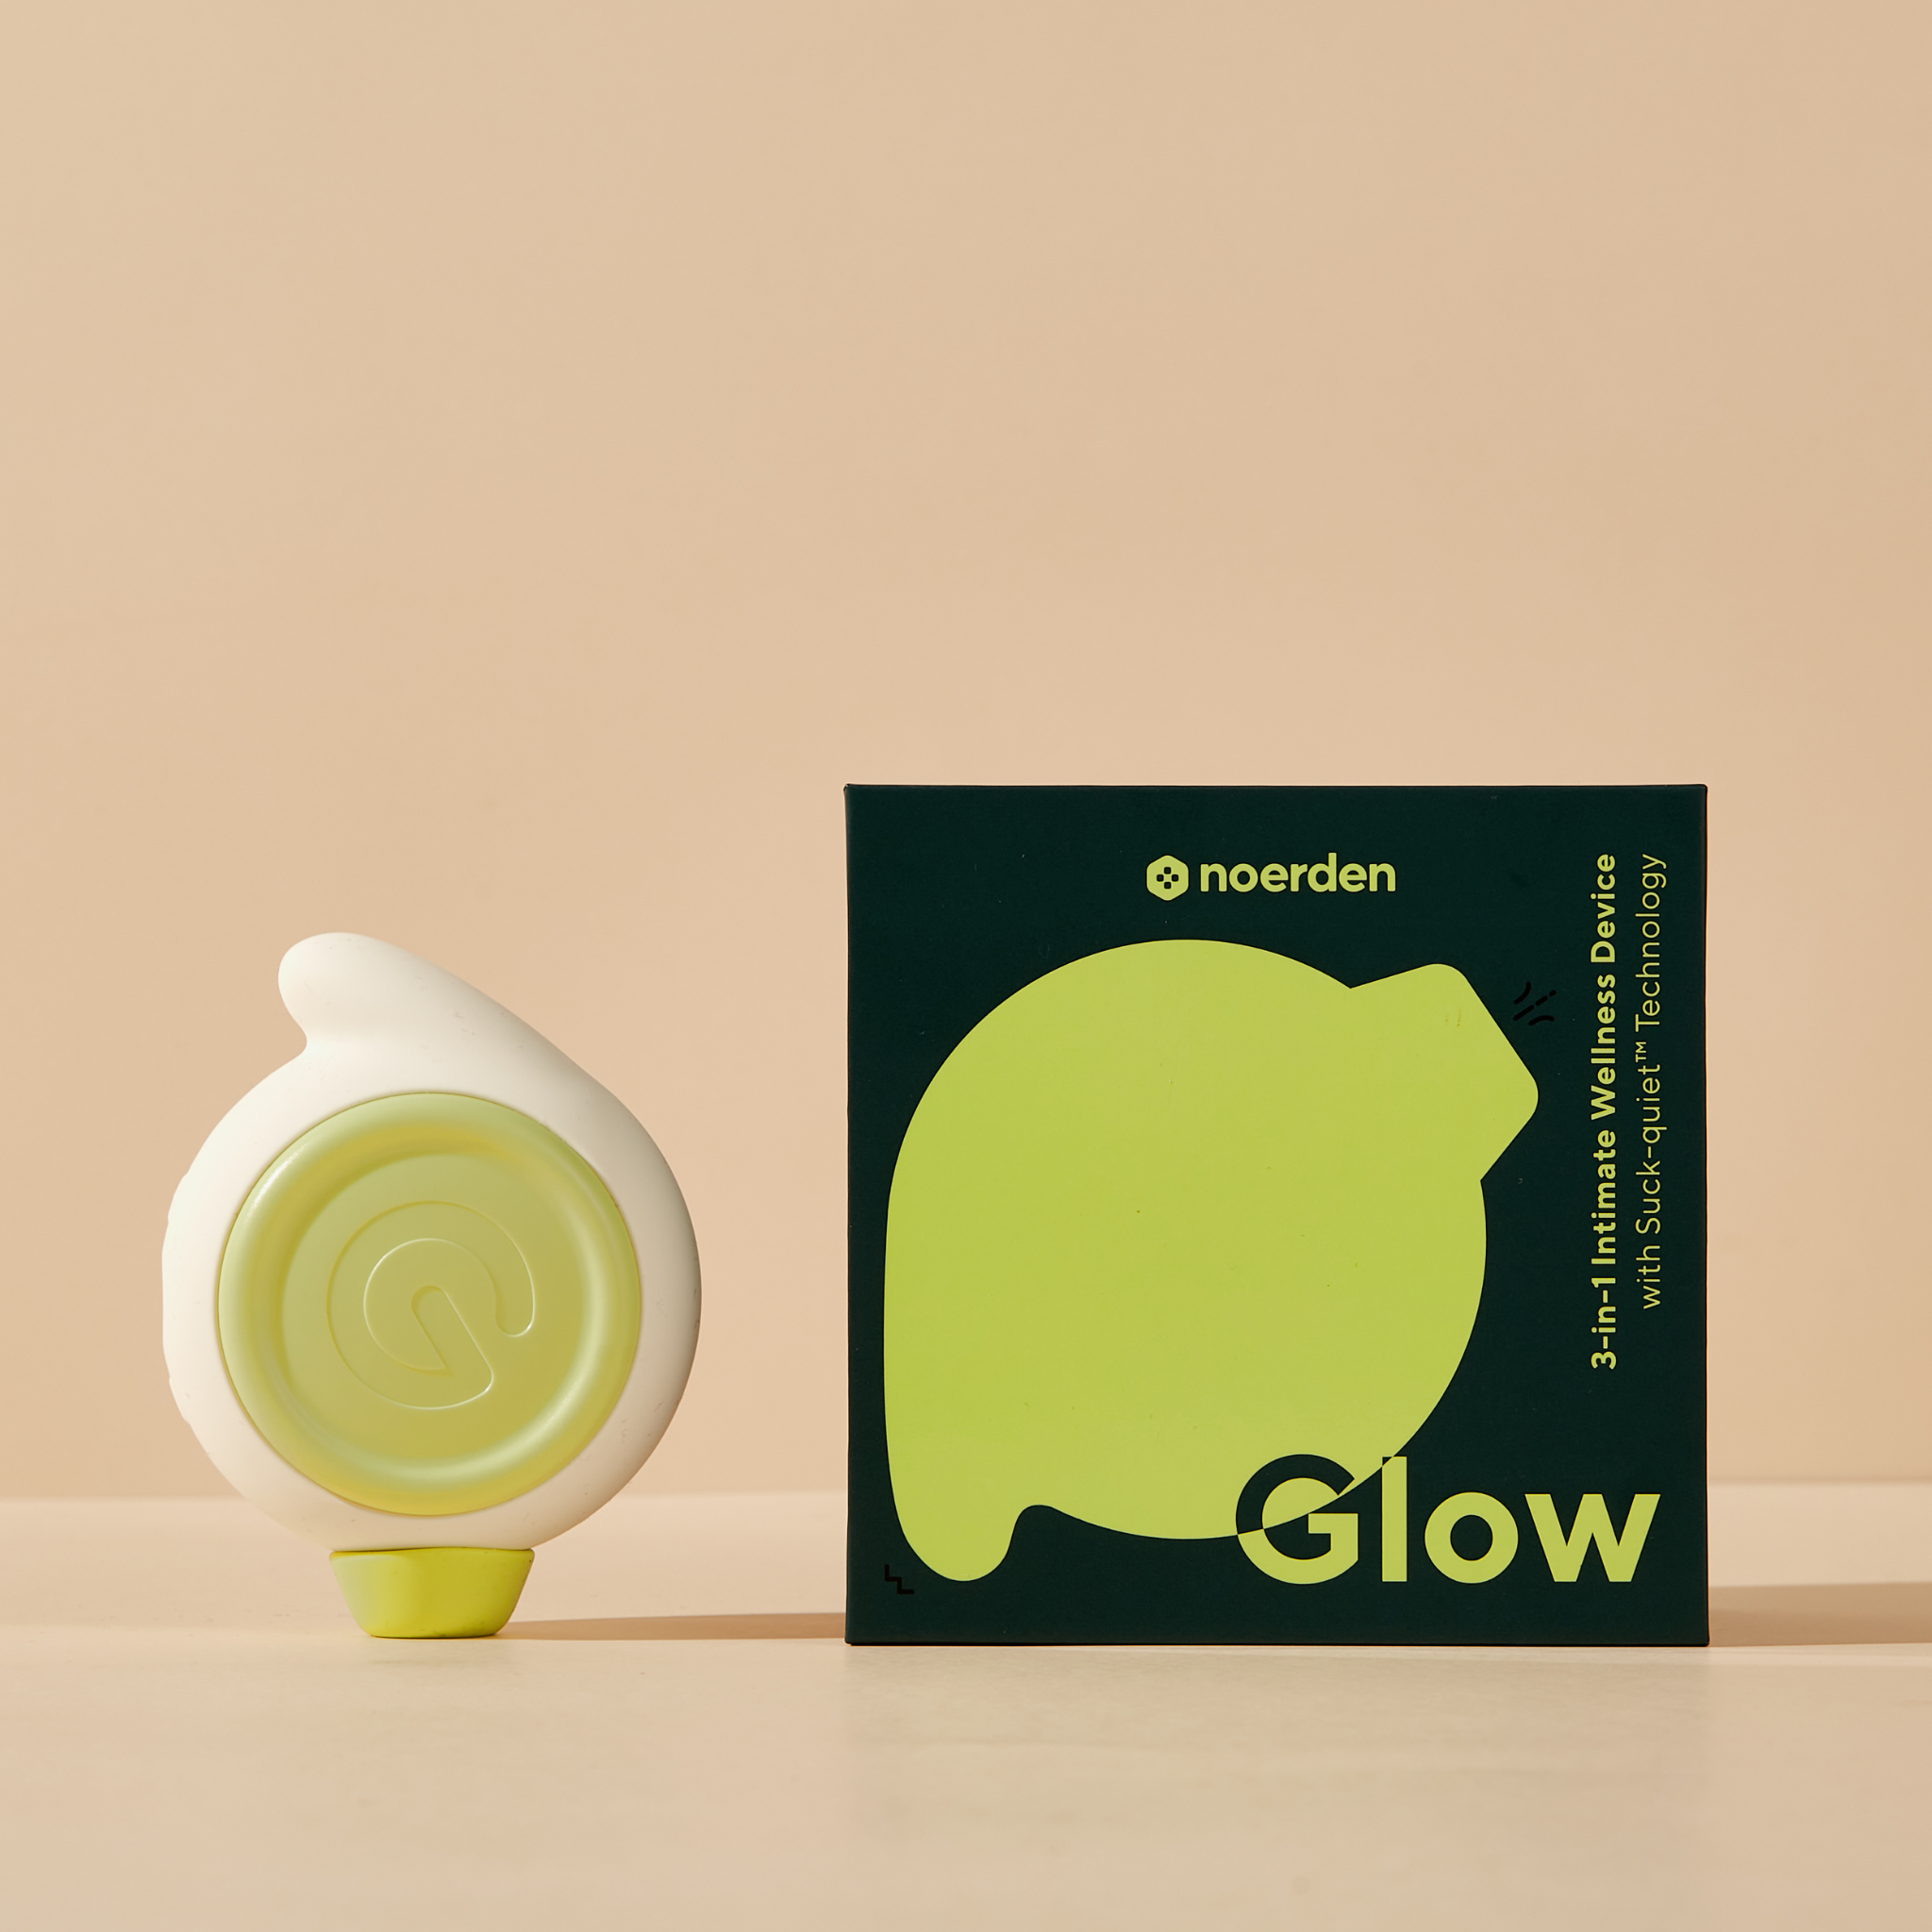 Glow accessoire intime